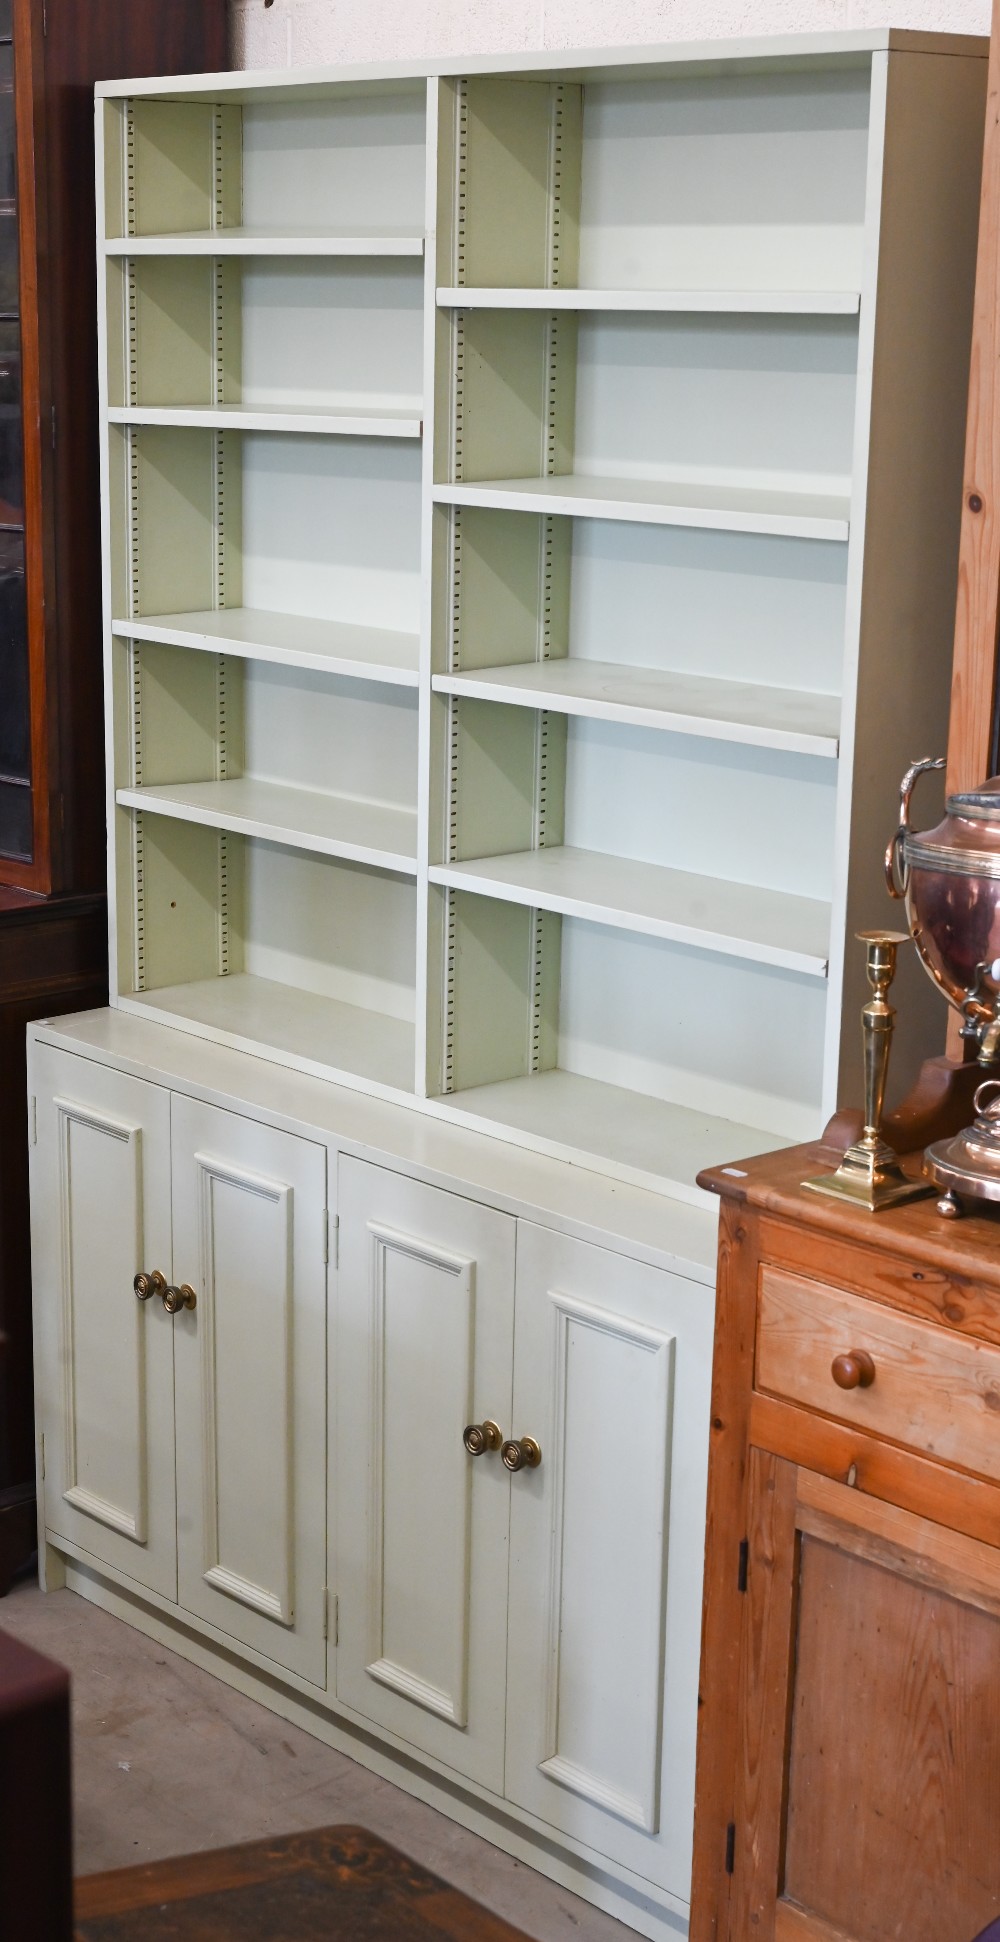 A green-painted bookcase with adjustable open shelving over panelled cupboards, 122 cm wide x 40